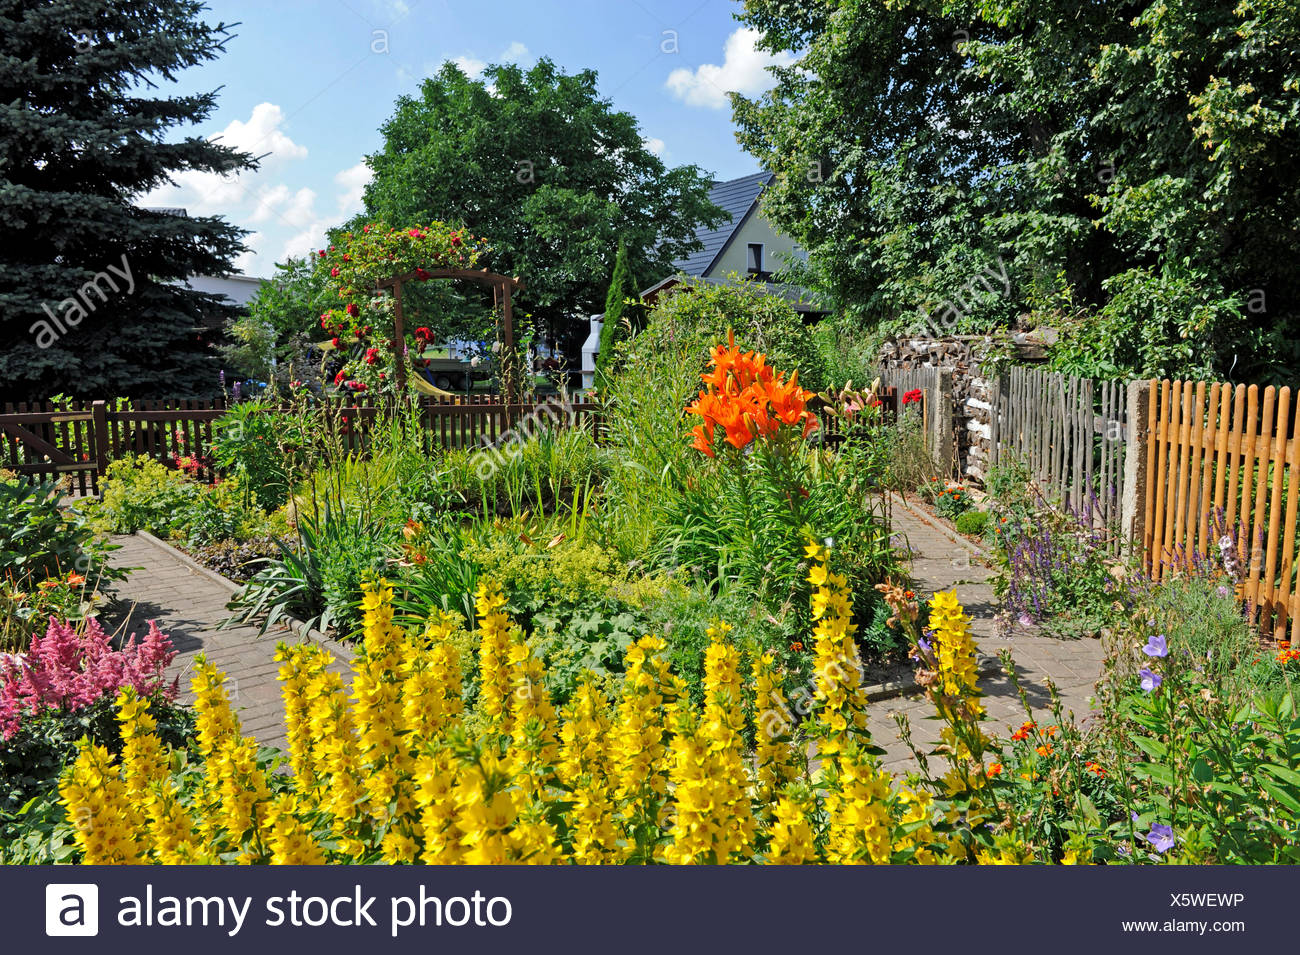 Of Romantic Cottage Gardens With Blossoming Summer Flowers And